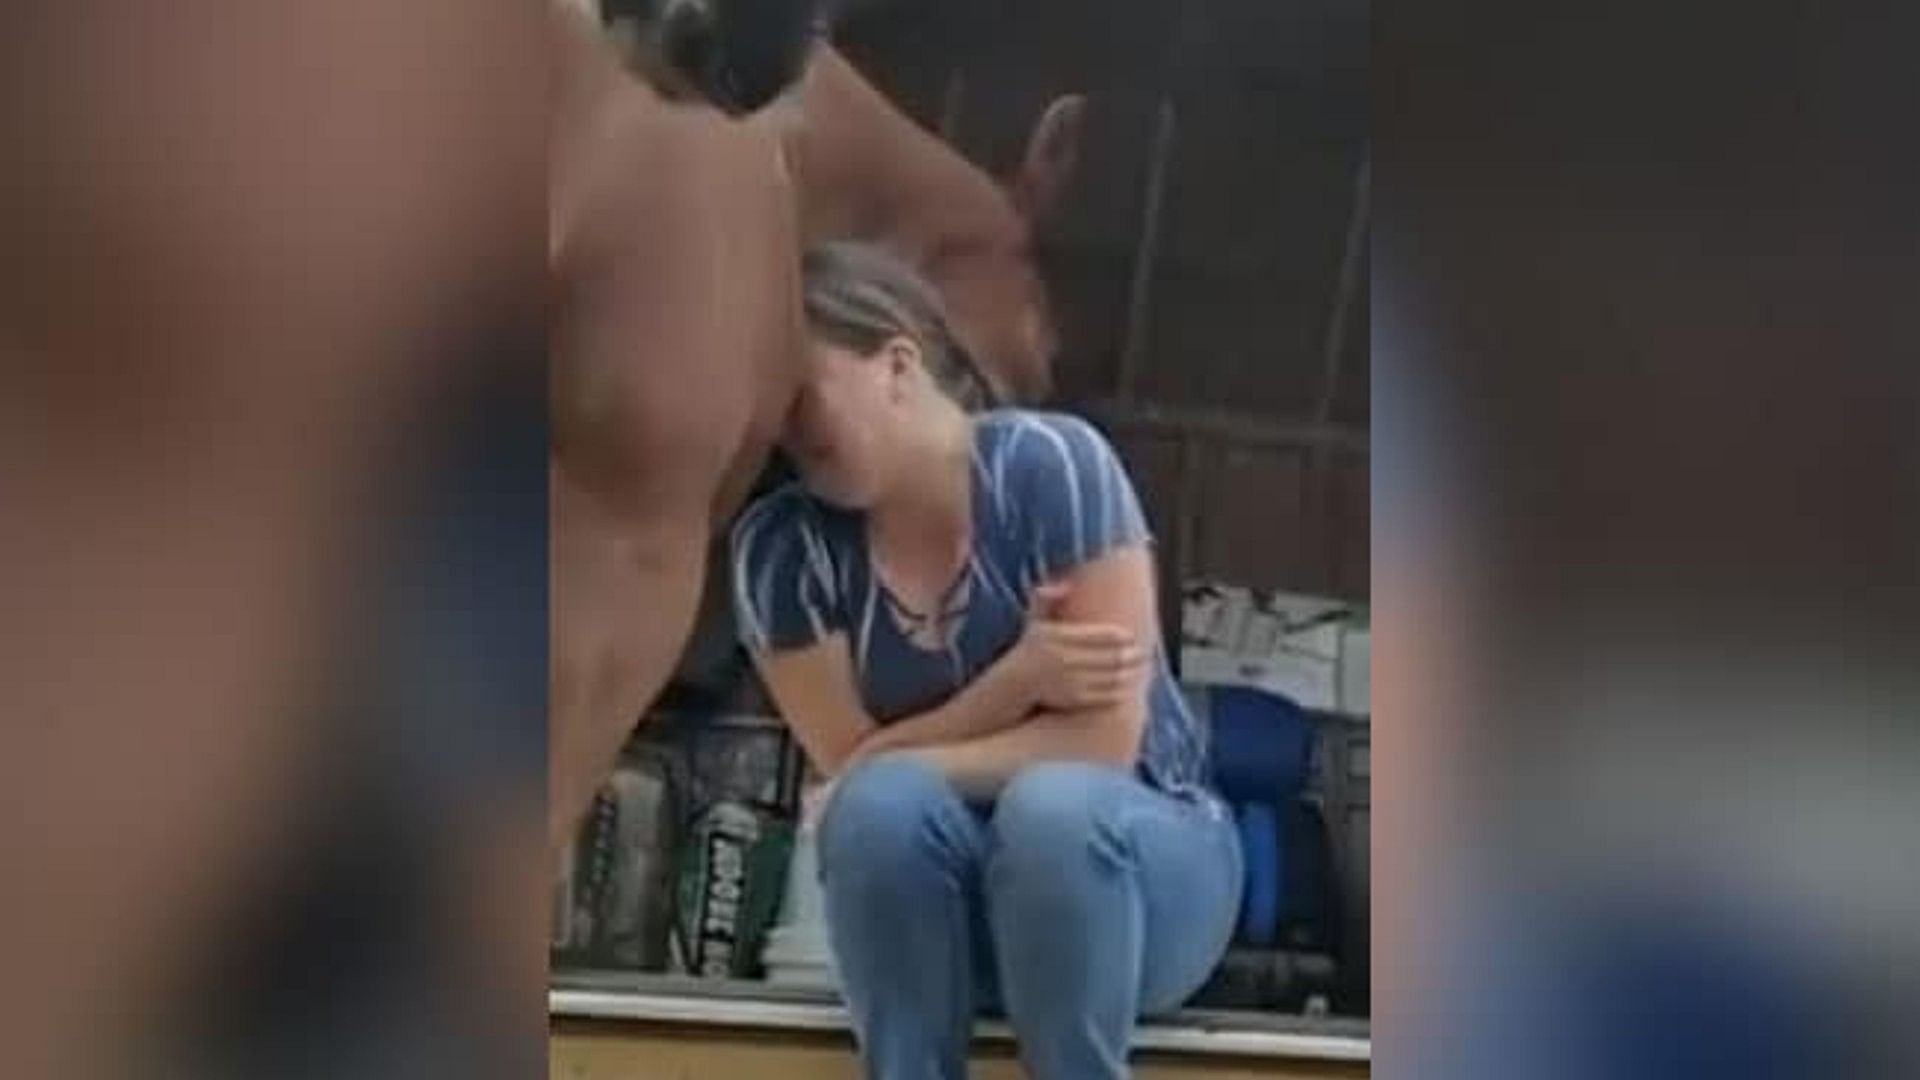 horse consoling crying lady in emotional video going viral on social media